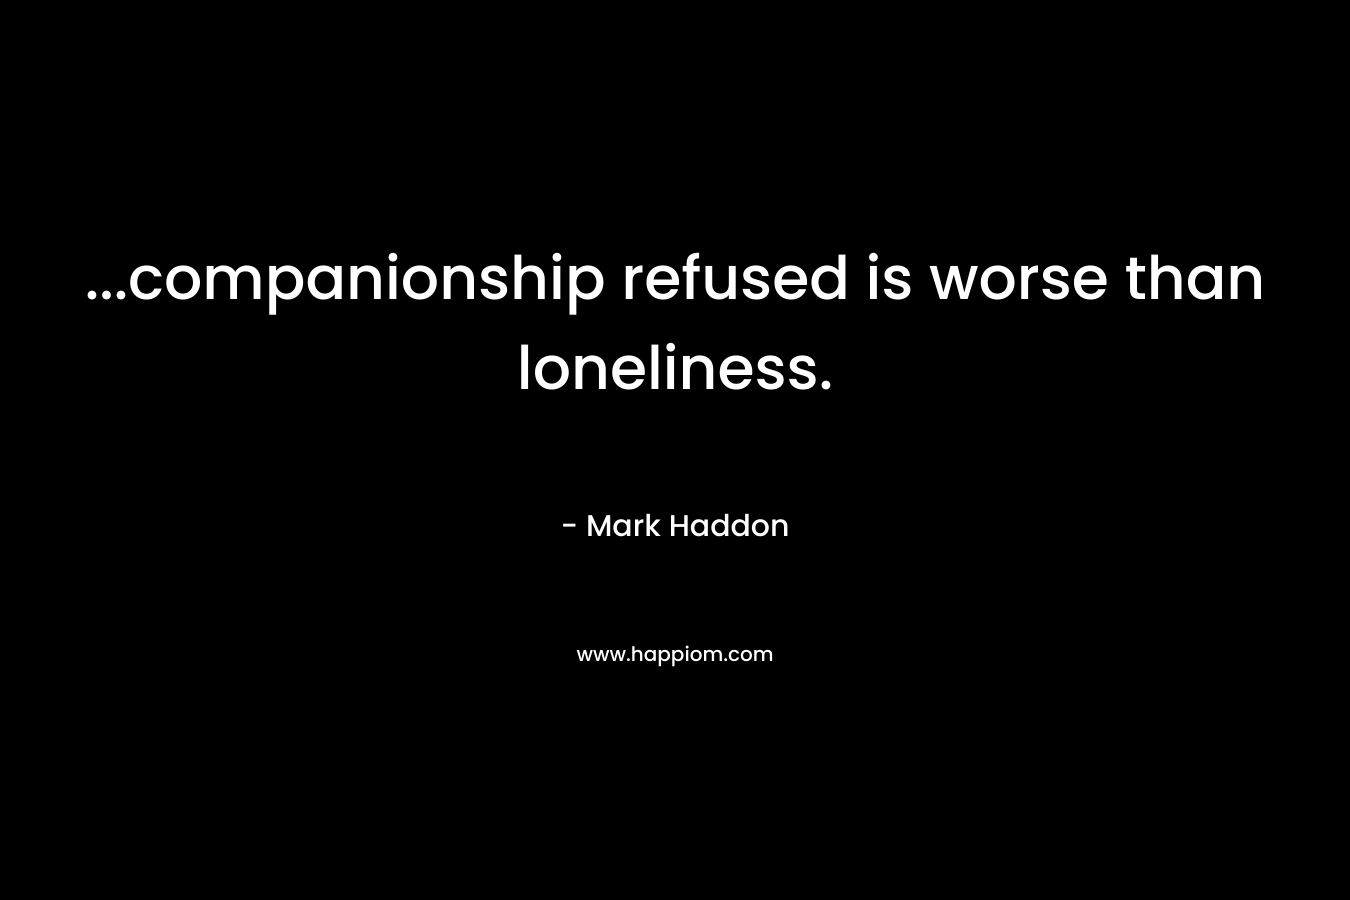 ...companionship refused is worse than loneliness.